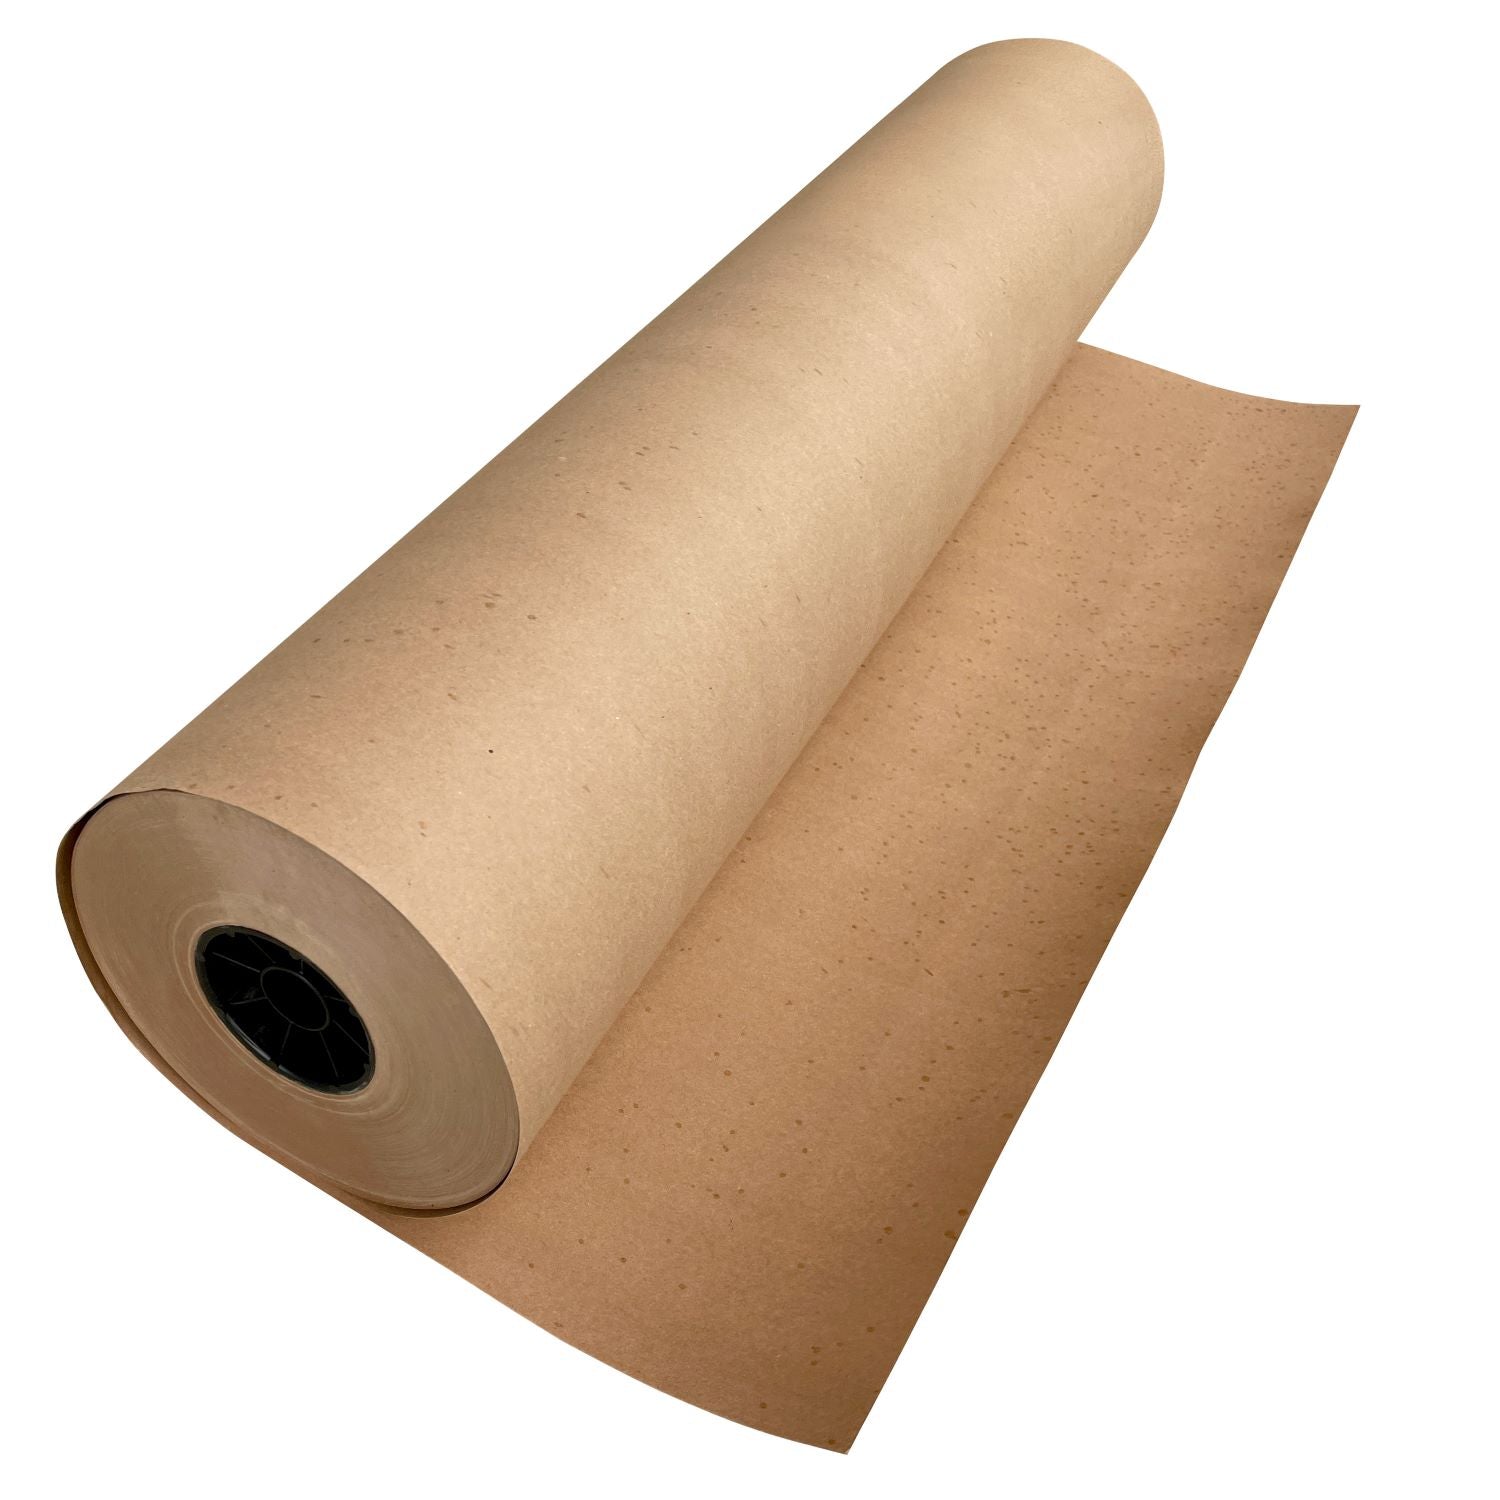 Heavy Duty Builders Paper Roll - 75 lb Construction Paper (Brown